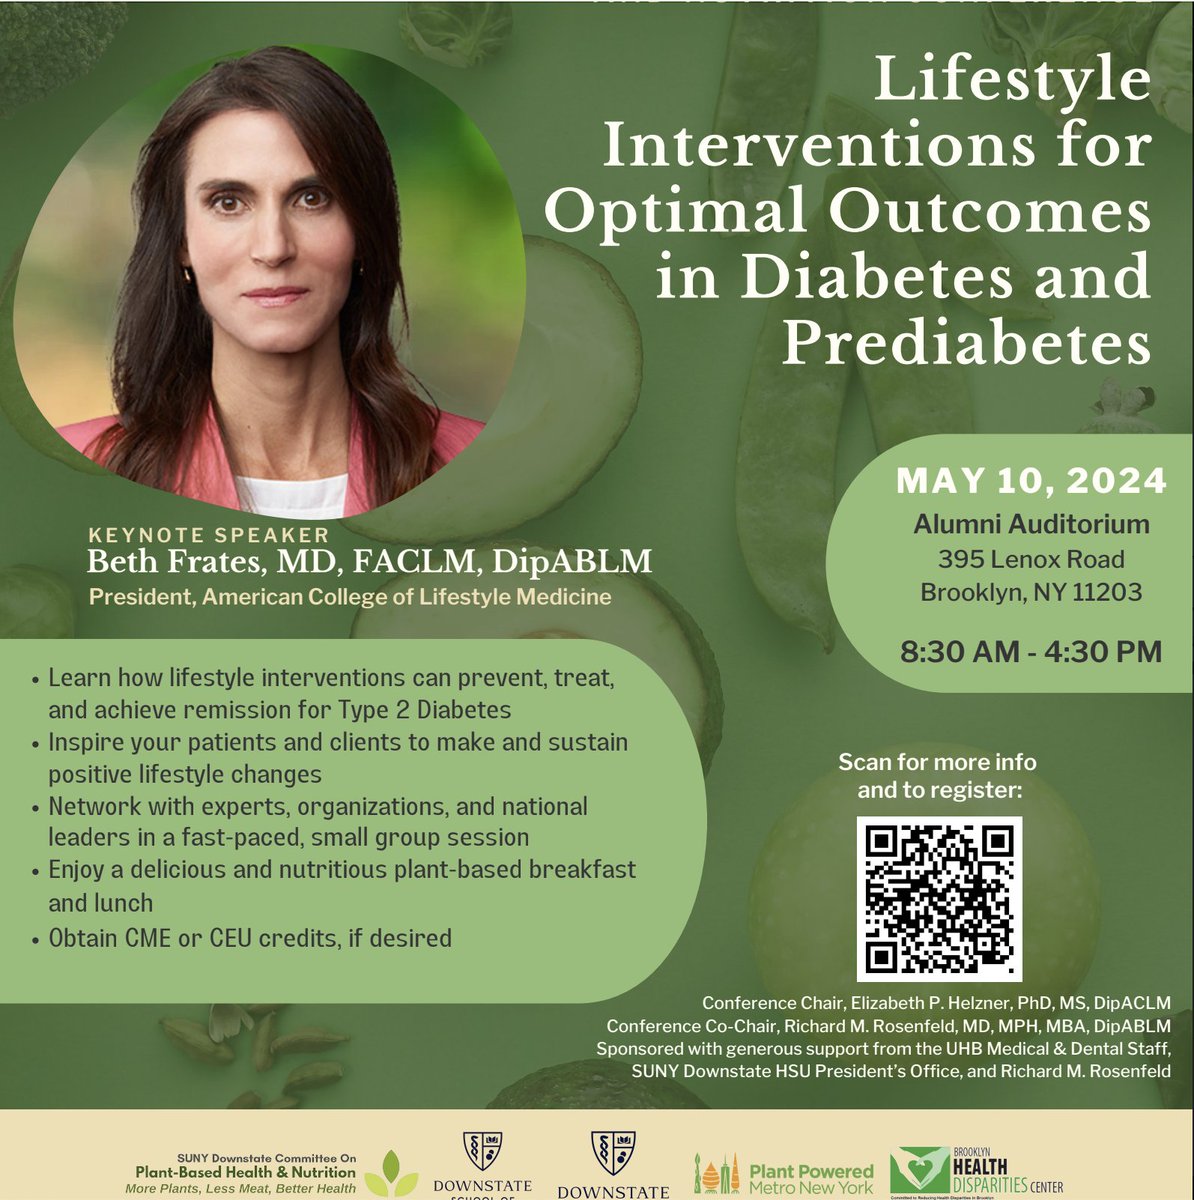 Honored and excited to be presenting a keynote at the CME conference titled Lifestyle Interventions for Optimal Outcomes in Diabetes and Prediabetes at SUNY Downstate in Brooklyn on Friday, May 10, 2024. #diabetes #health #lifestylemedicine